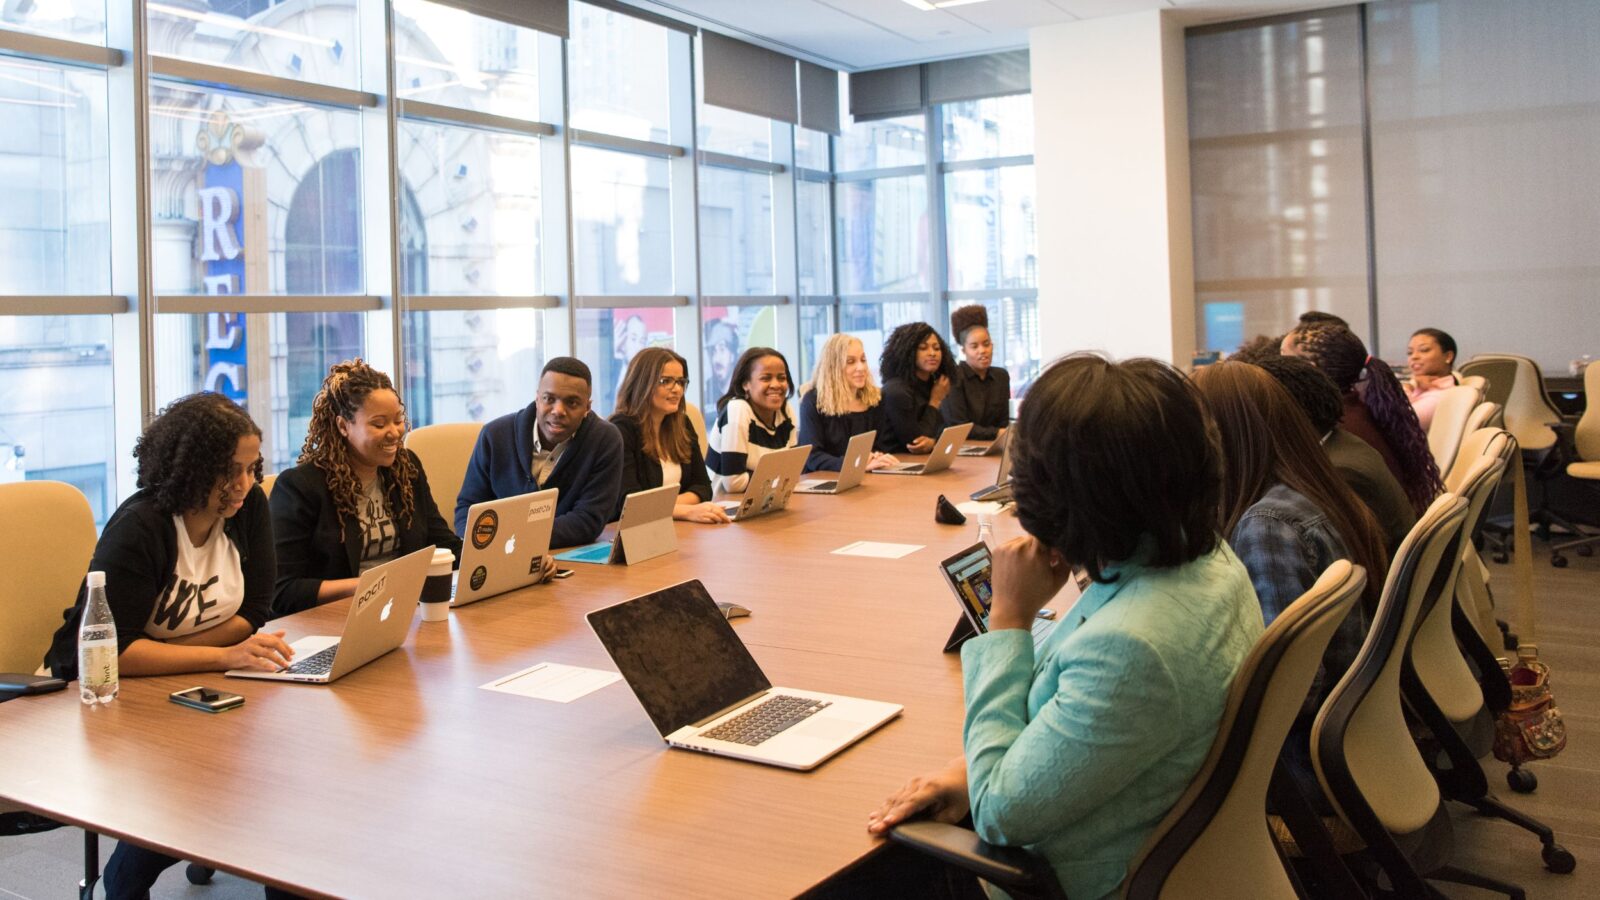 stock photo of a group of staff members in a conference room